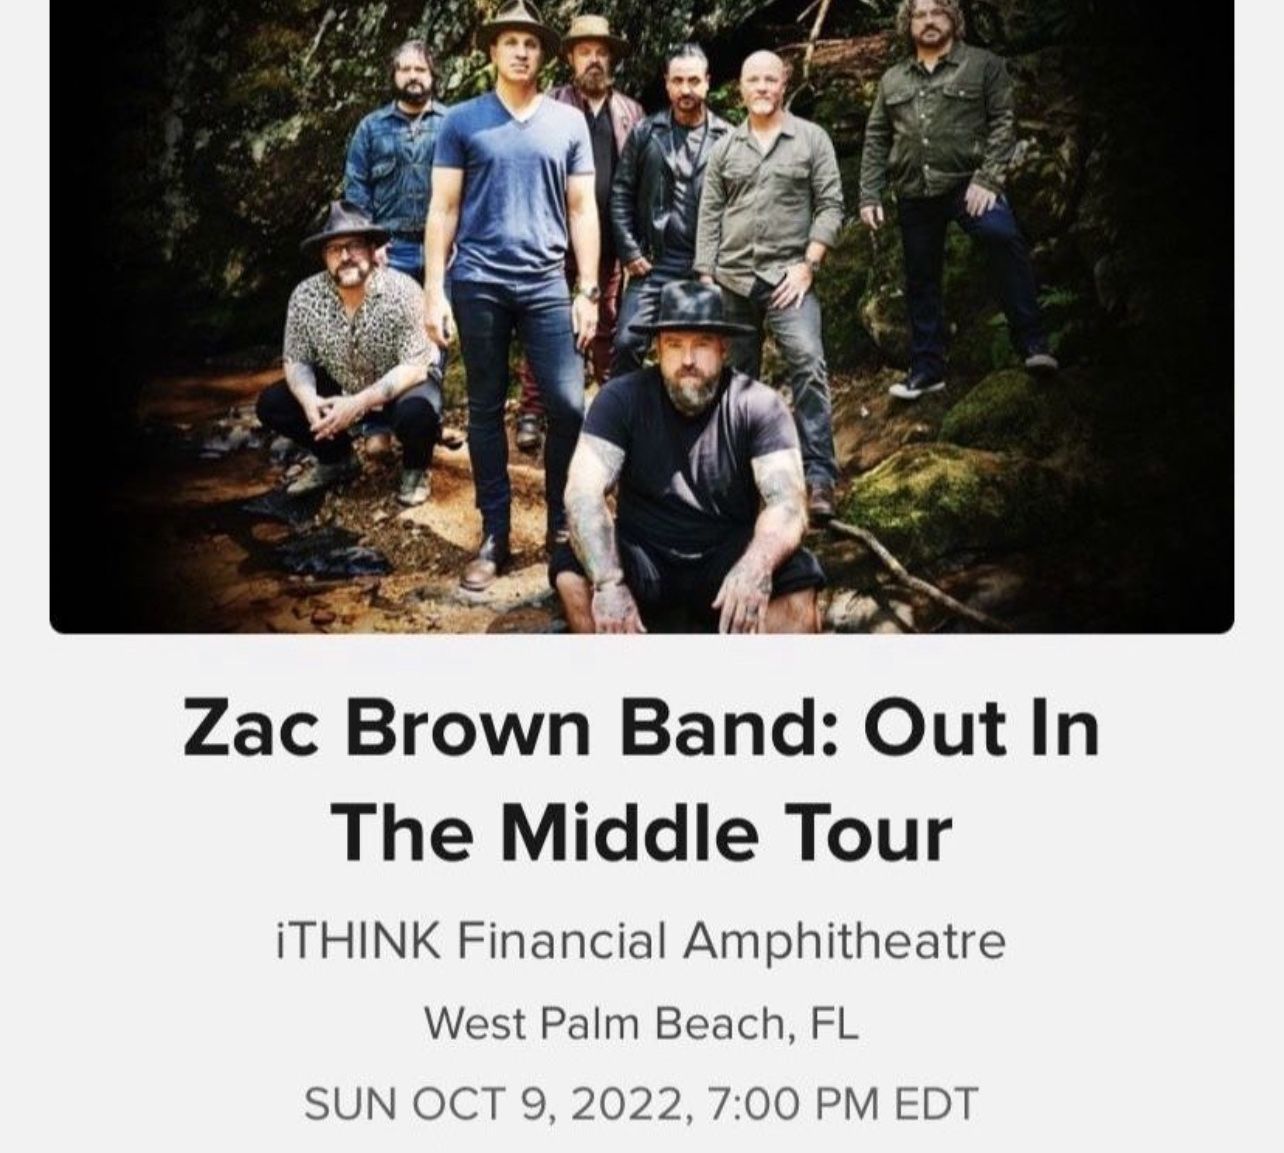 Zac Brown Band Selling (2)for Sunday, October 9th at iThink Amphitheater in WPB  MAKE AN OFFER